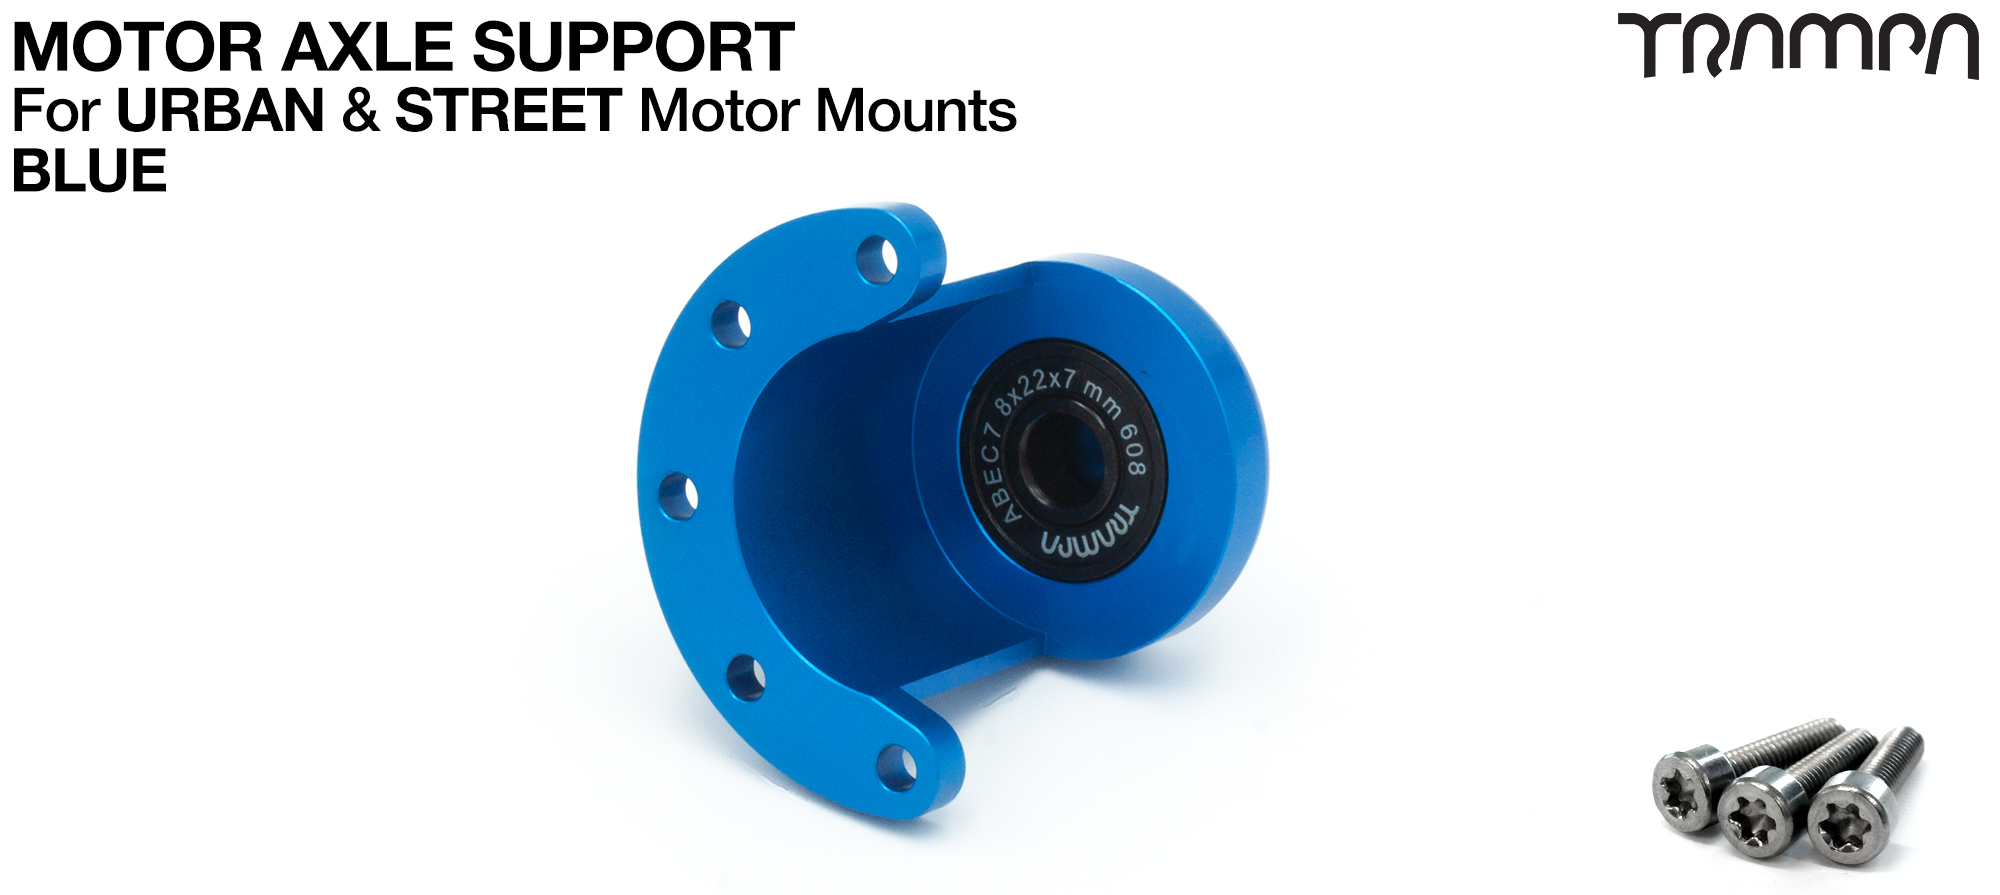 Motor Axle Support for Spring Truck Motor Mounts UNIVERSAL - BLUE